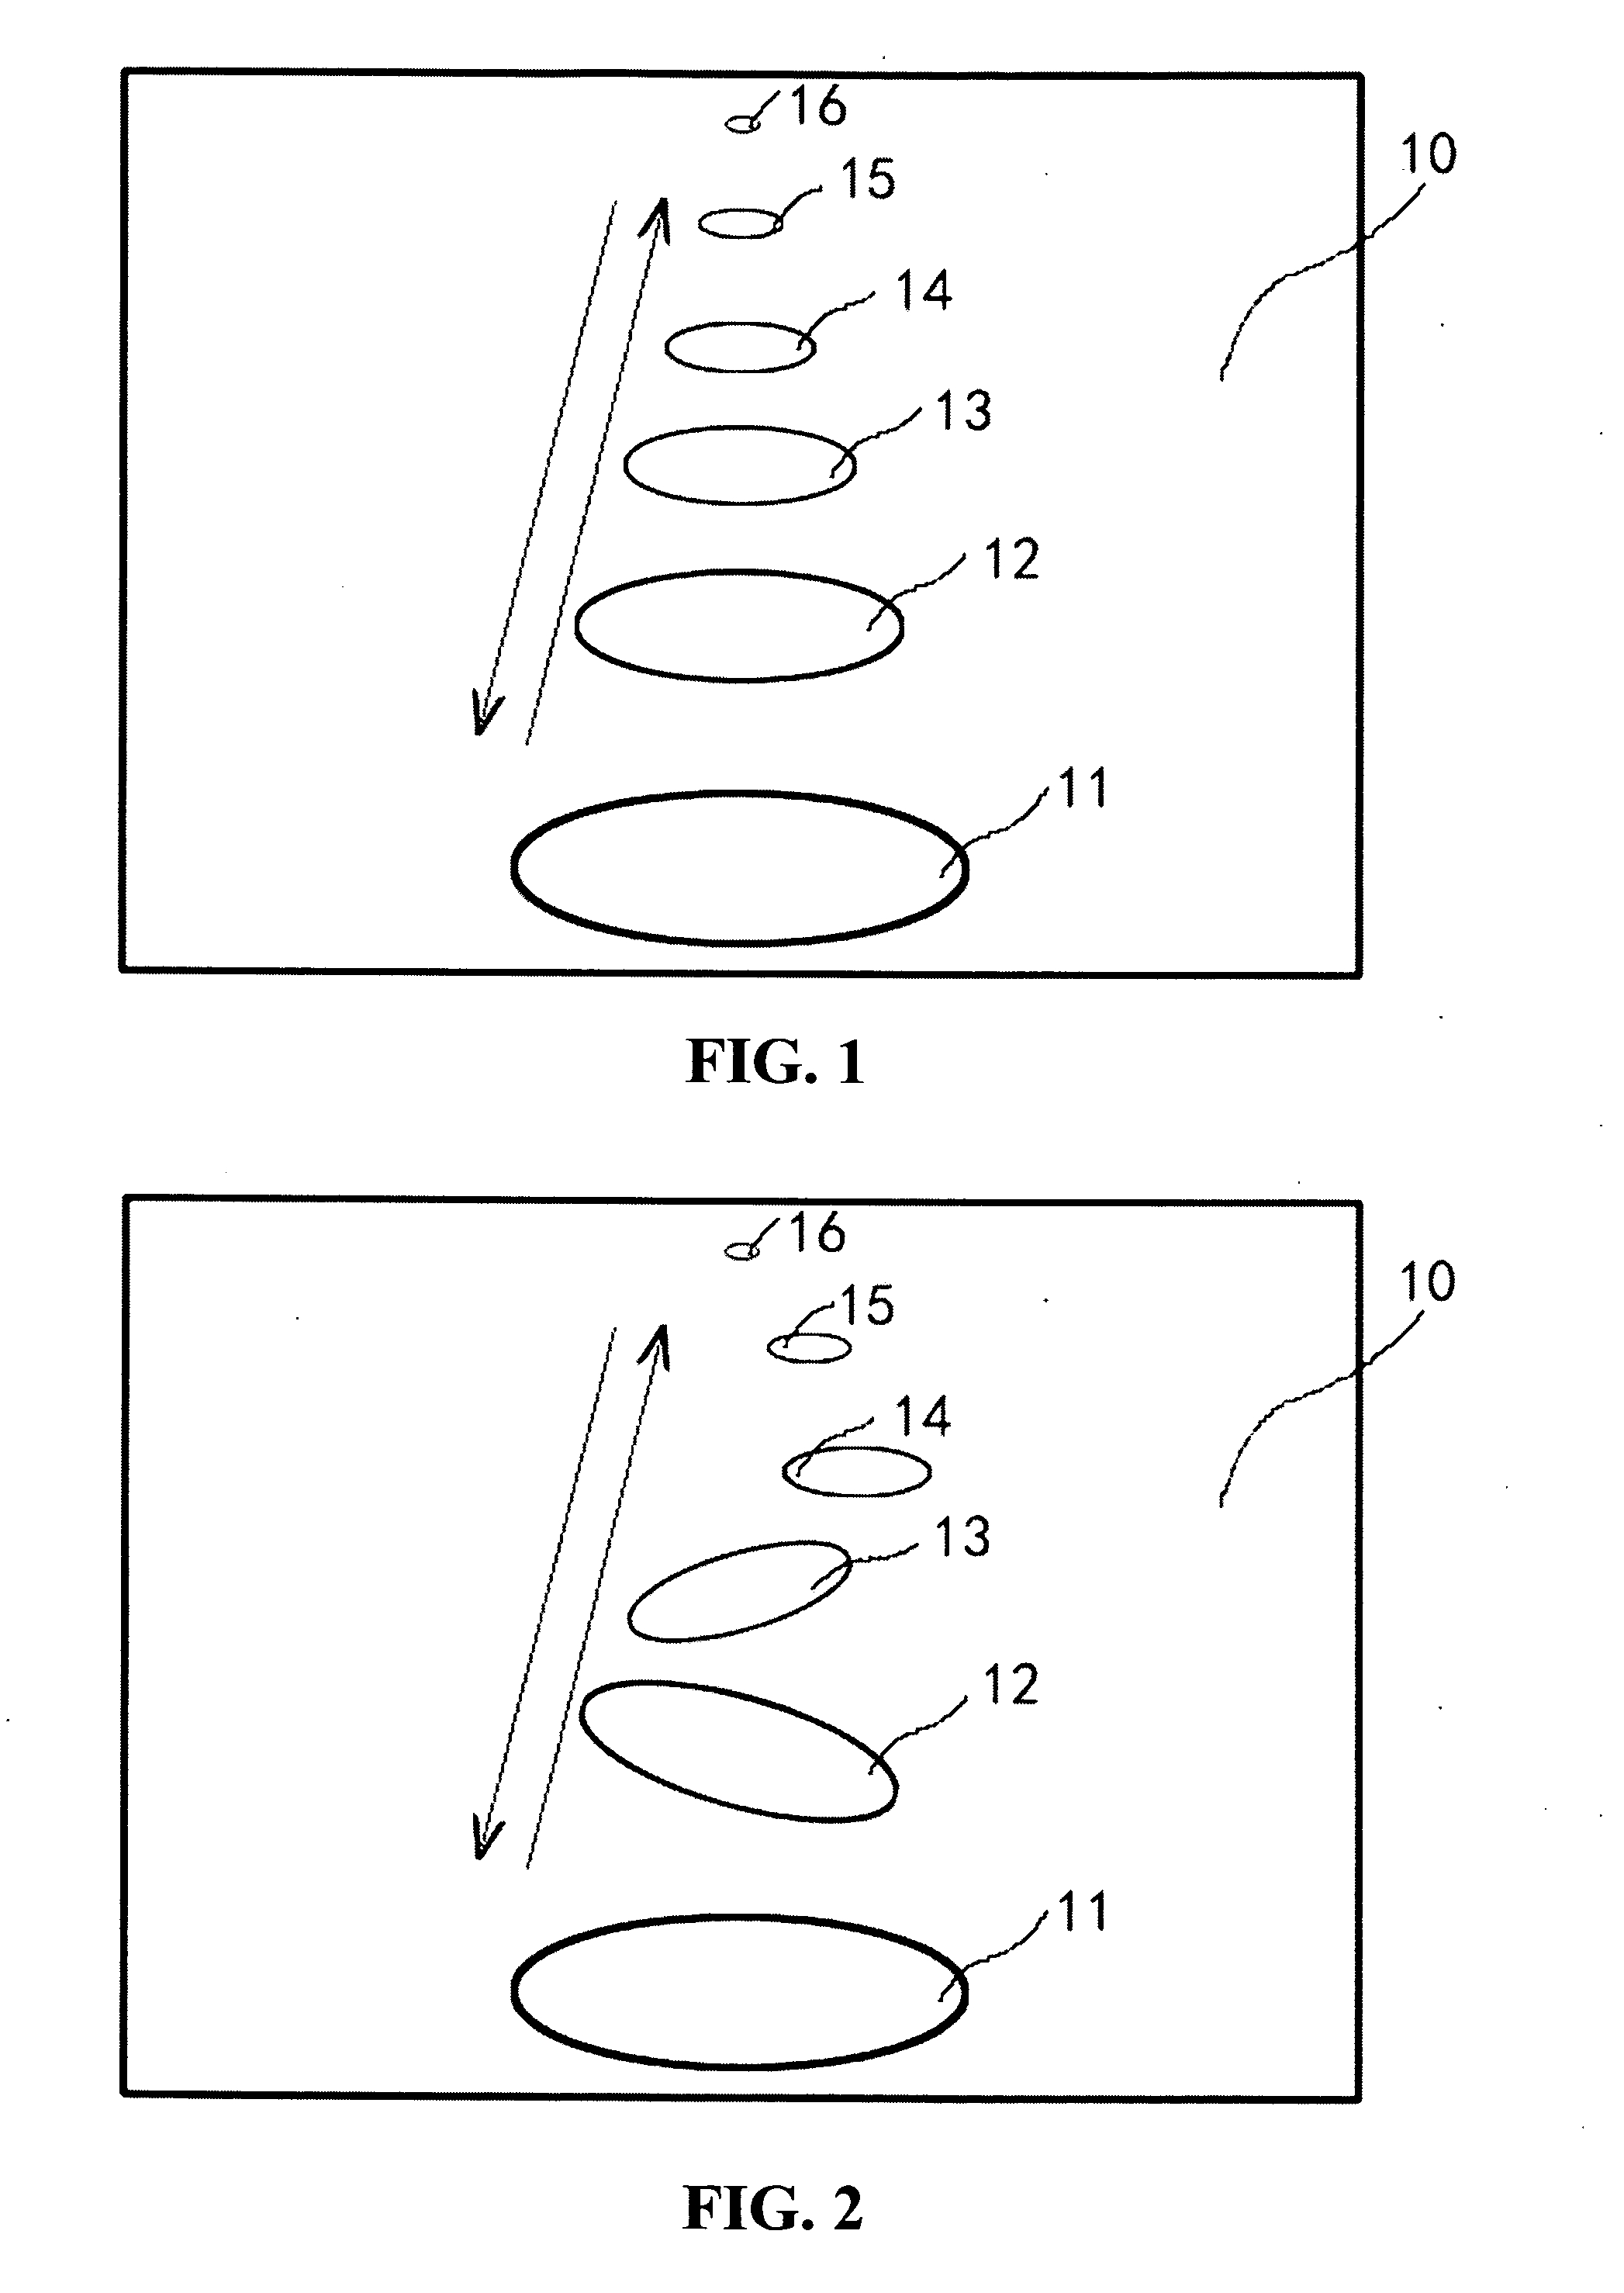 Method for relieving eye strain using animation